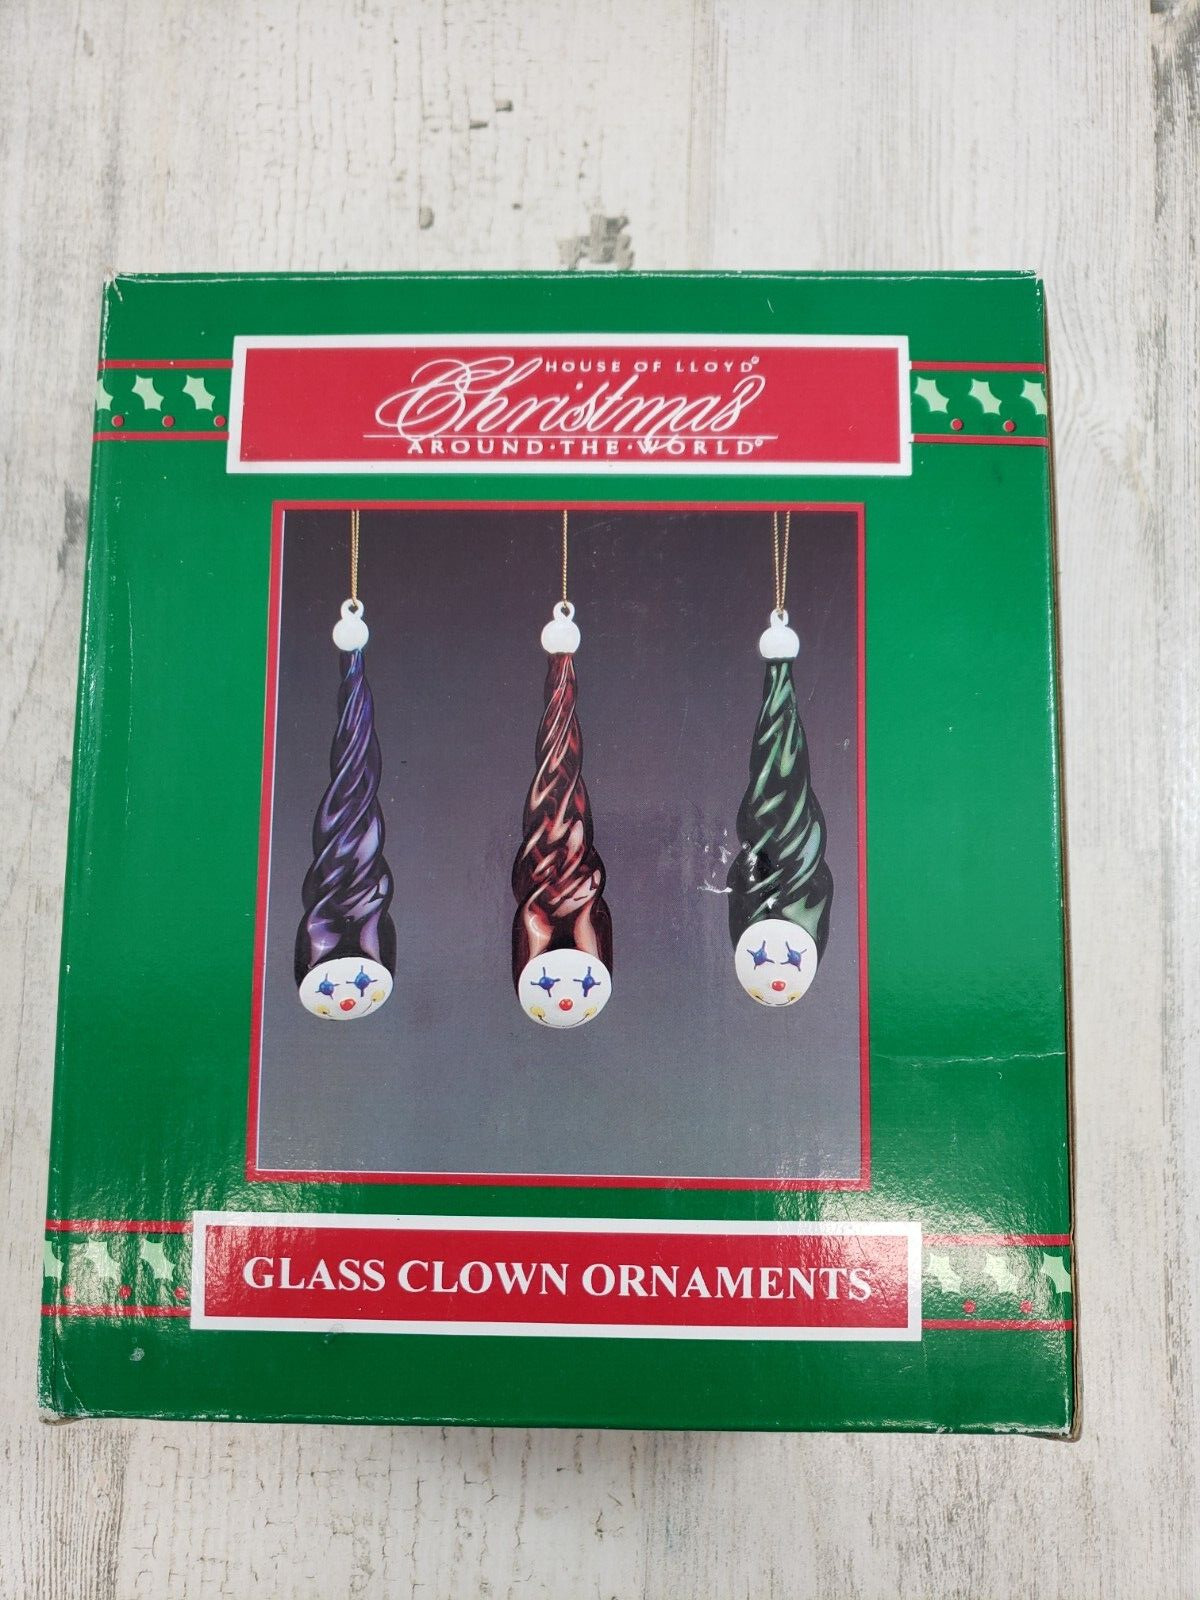 House of Lloyd Christmas Around The World Glass Clown Ornaments set of 3